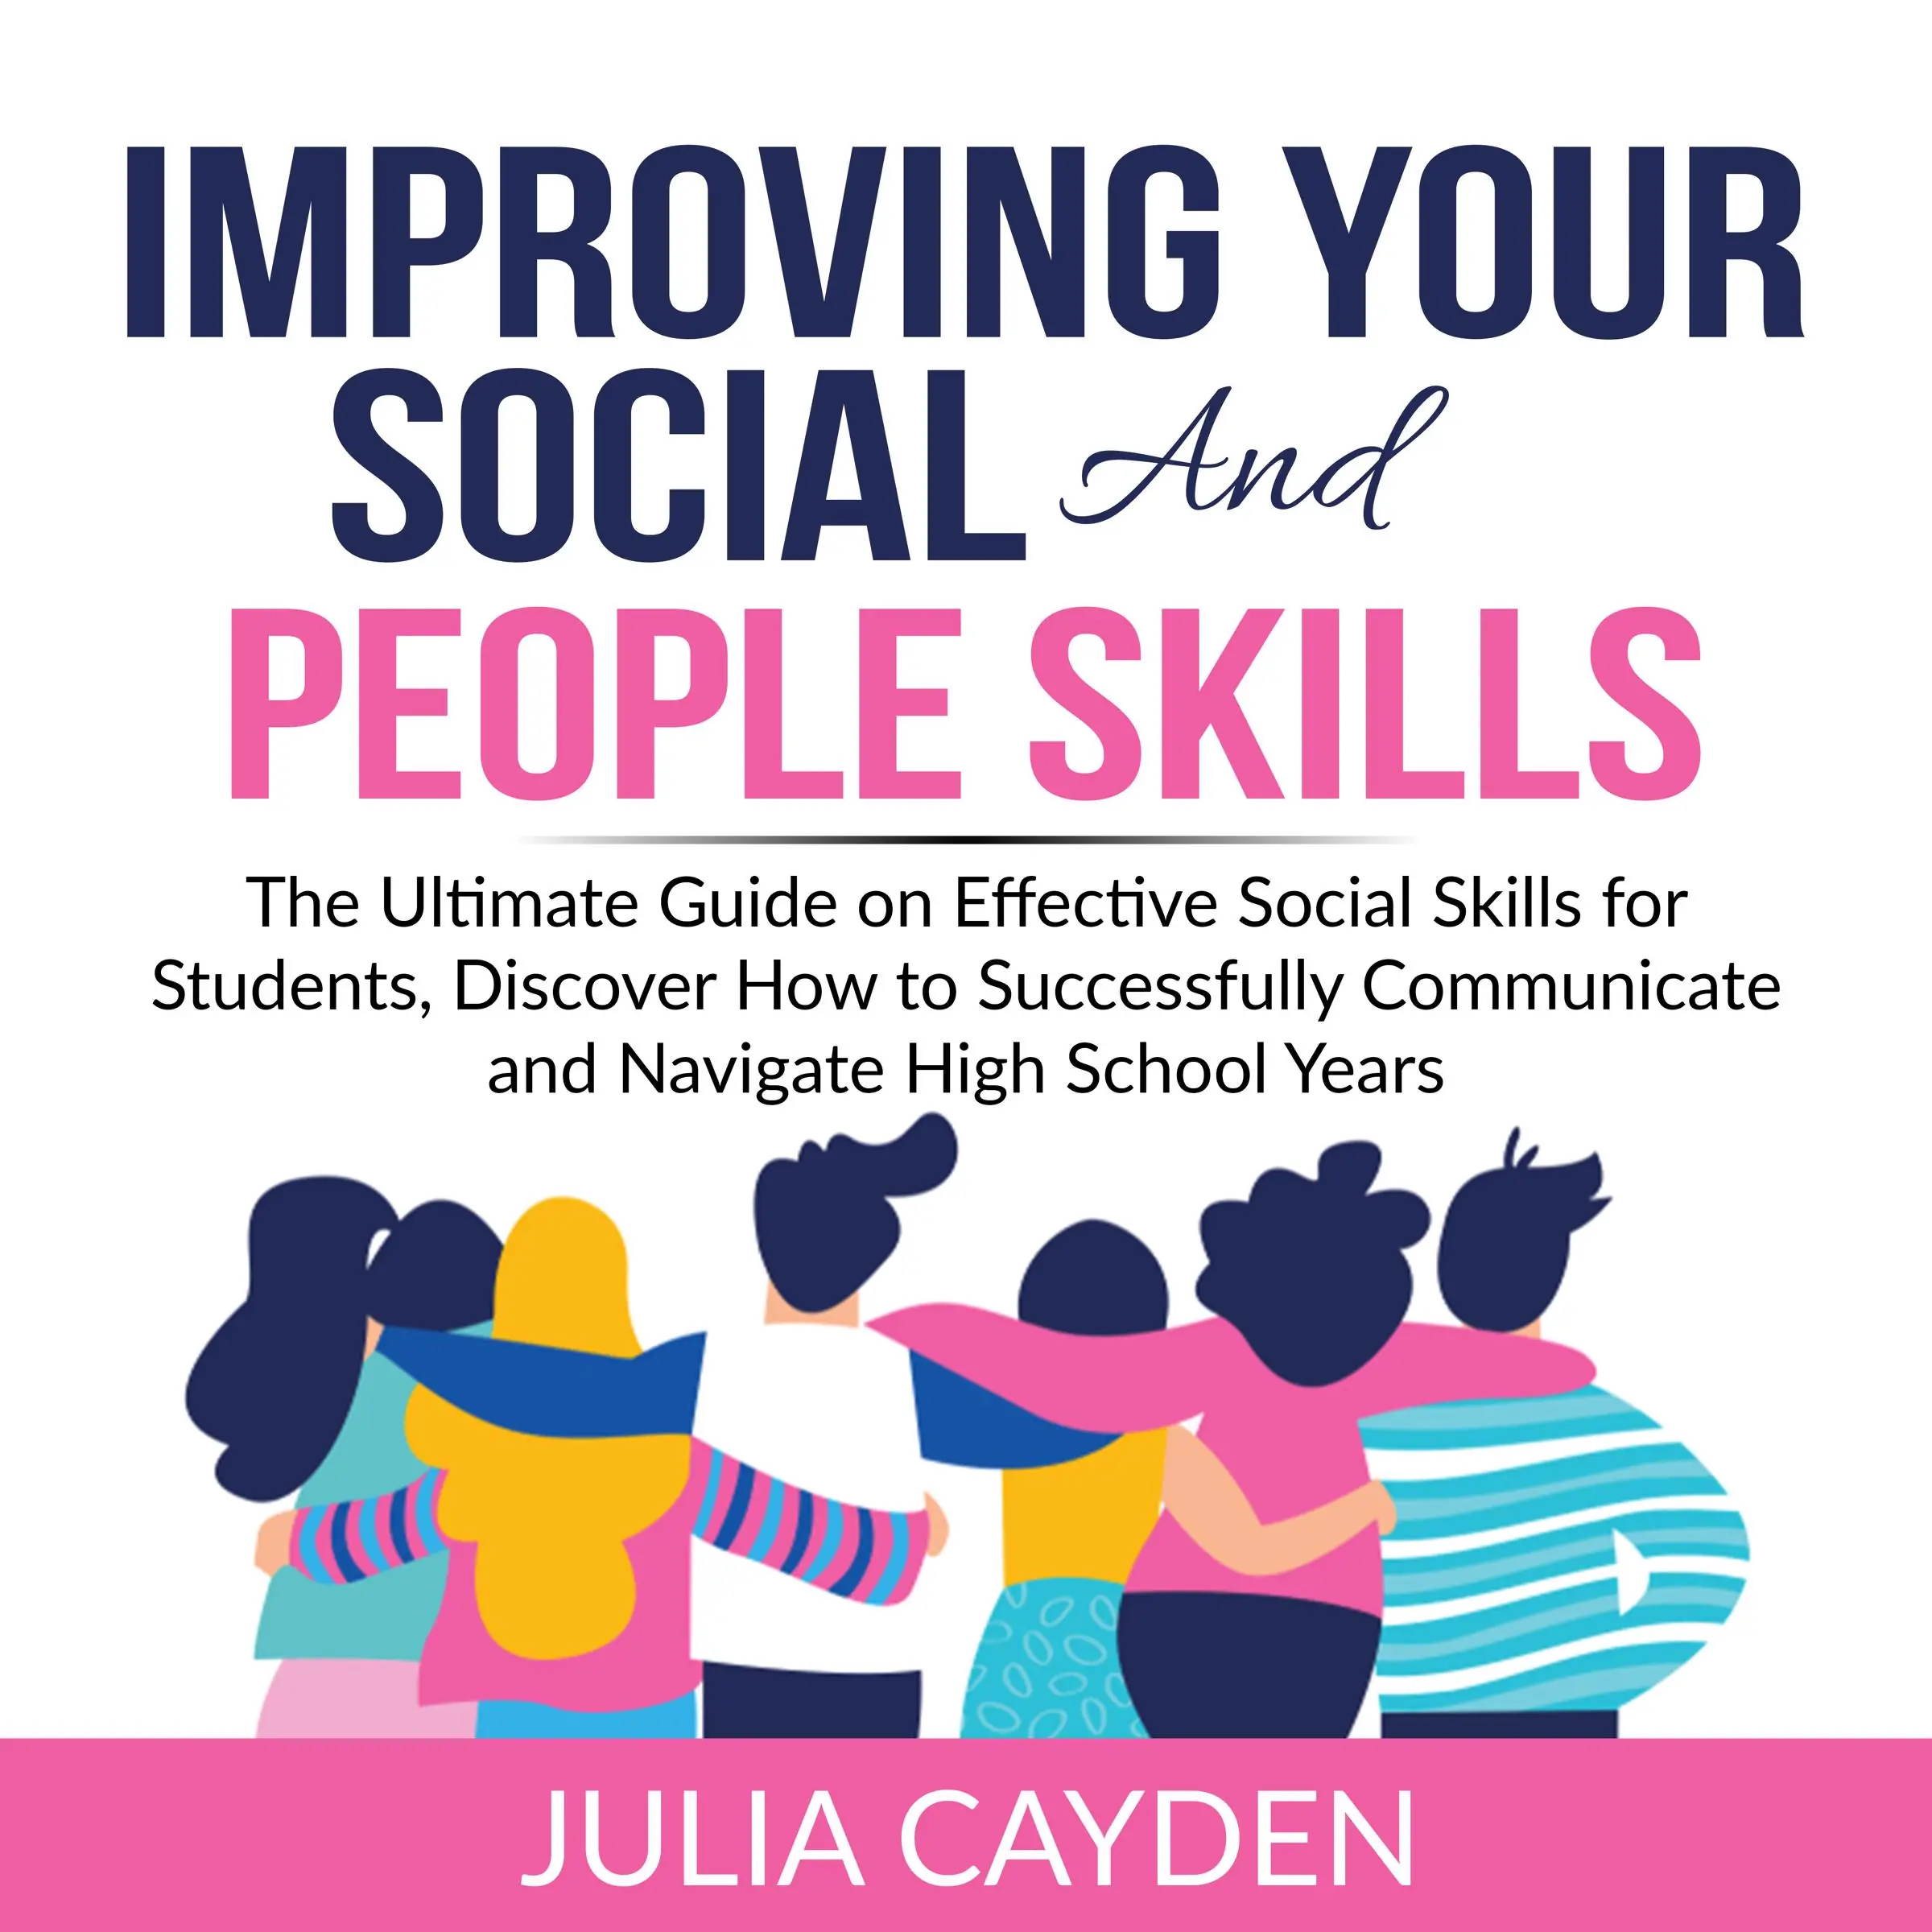 Improving Your Social and People Skills: The Ultimate Guide on Effective Social Skills for Students, Discover How to Successfully Communicate and Navigate High School Years Audiobook by Julia Cayden